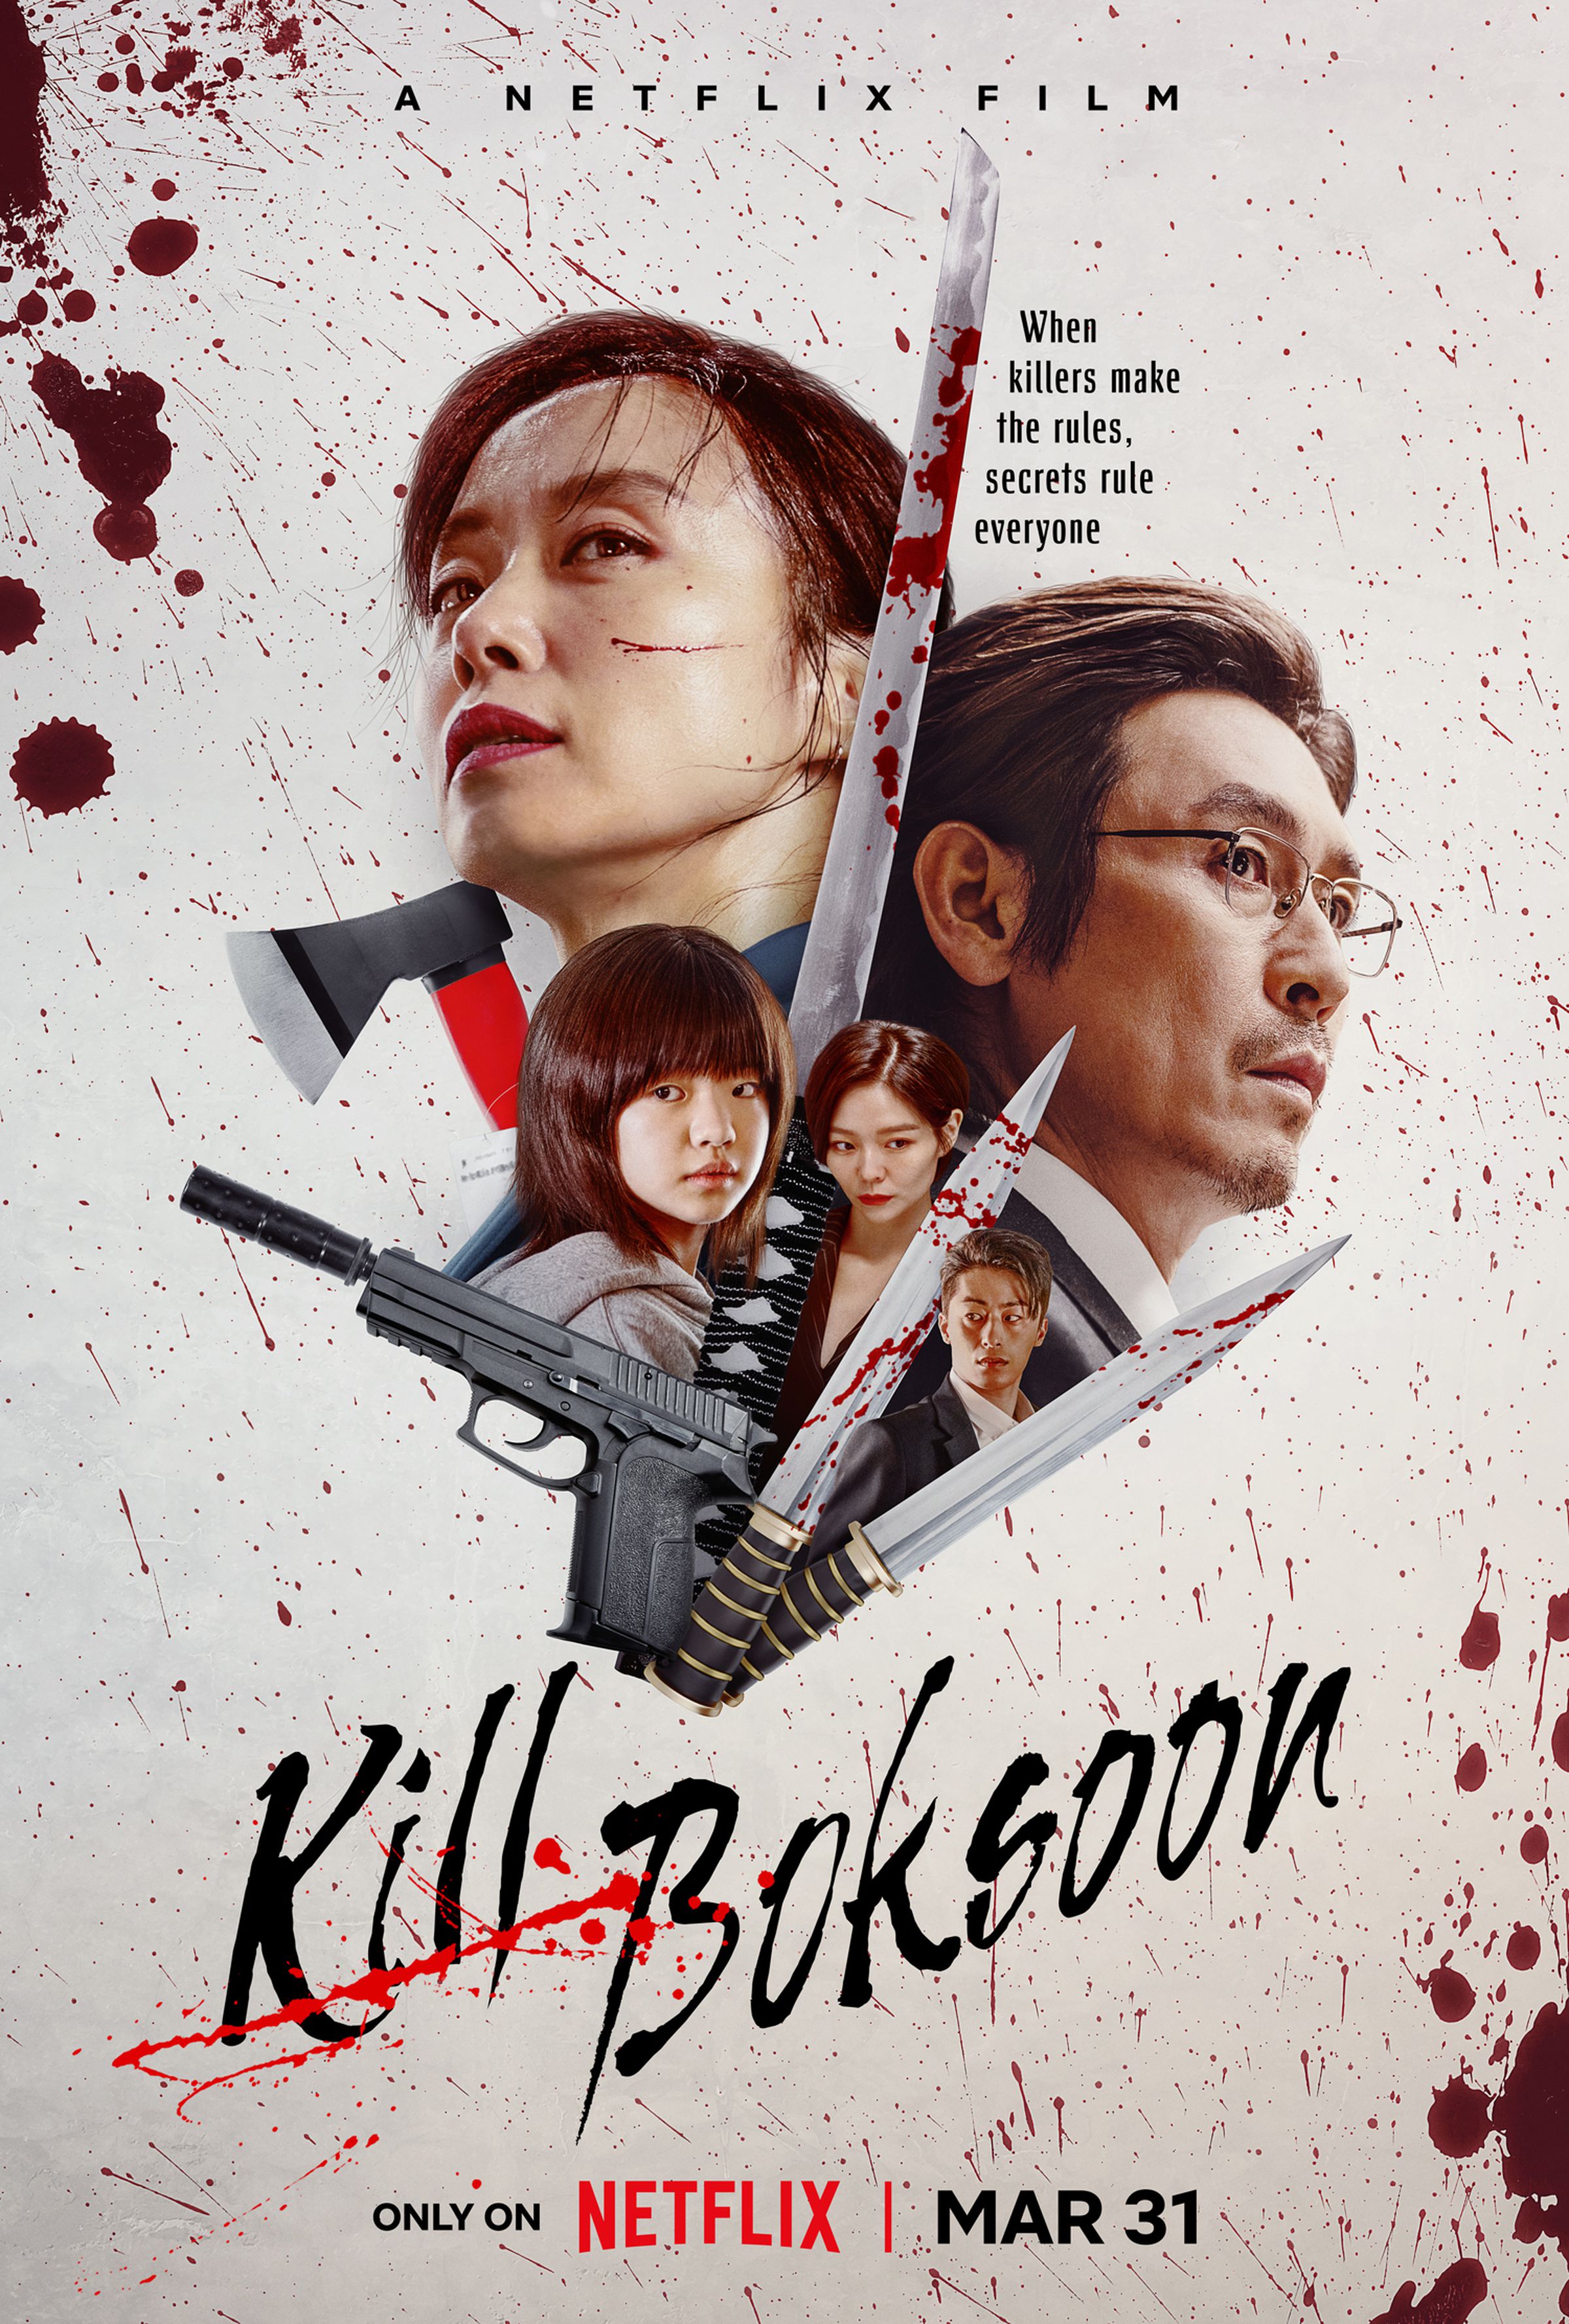 A movie poster for the Netflix release Kill Boksoon.